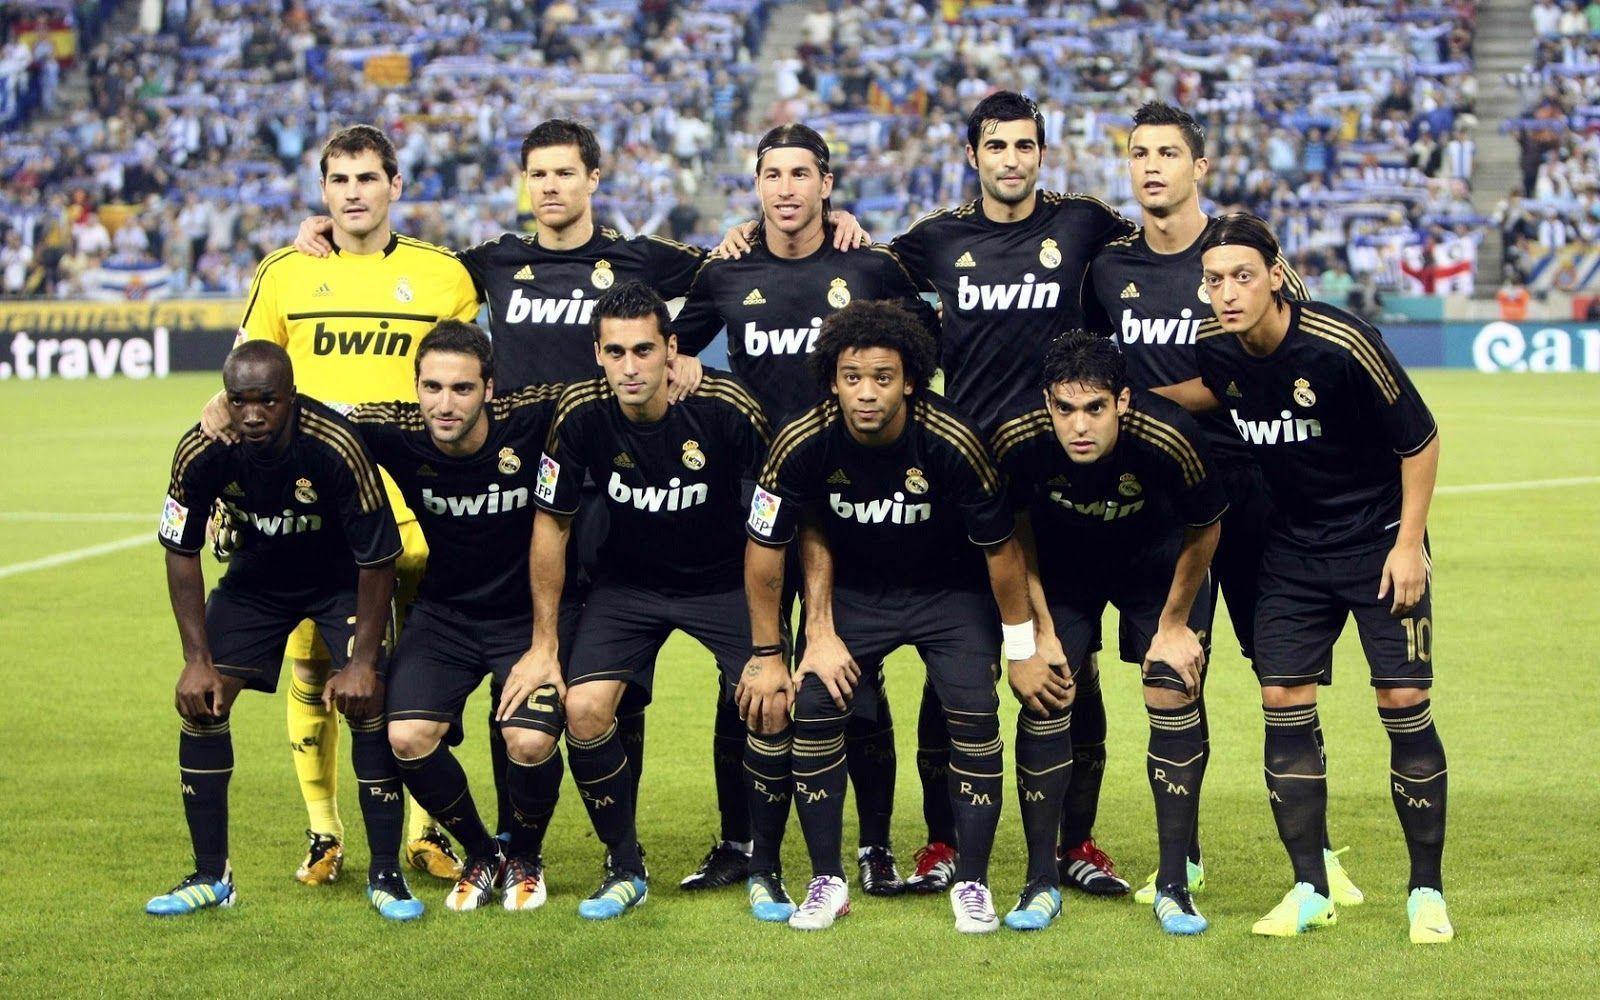 Real Madrid Picture Players And Videos: Football 2013: Real